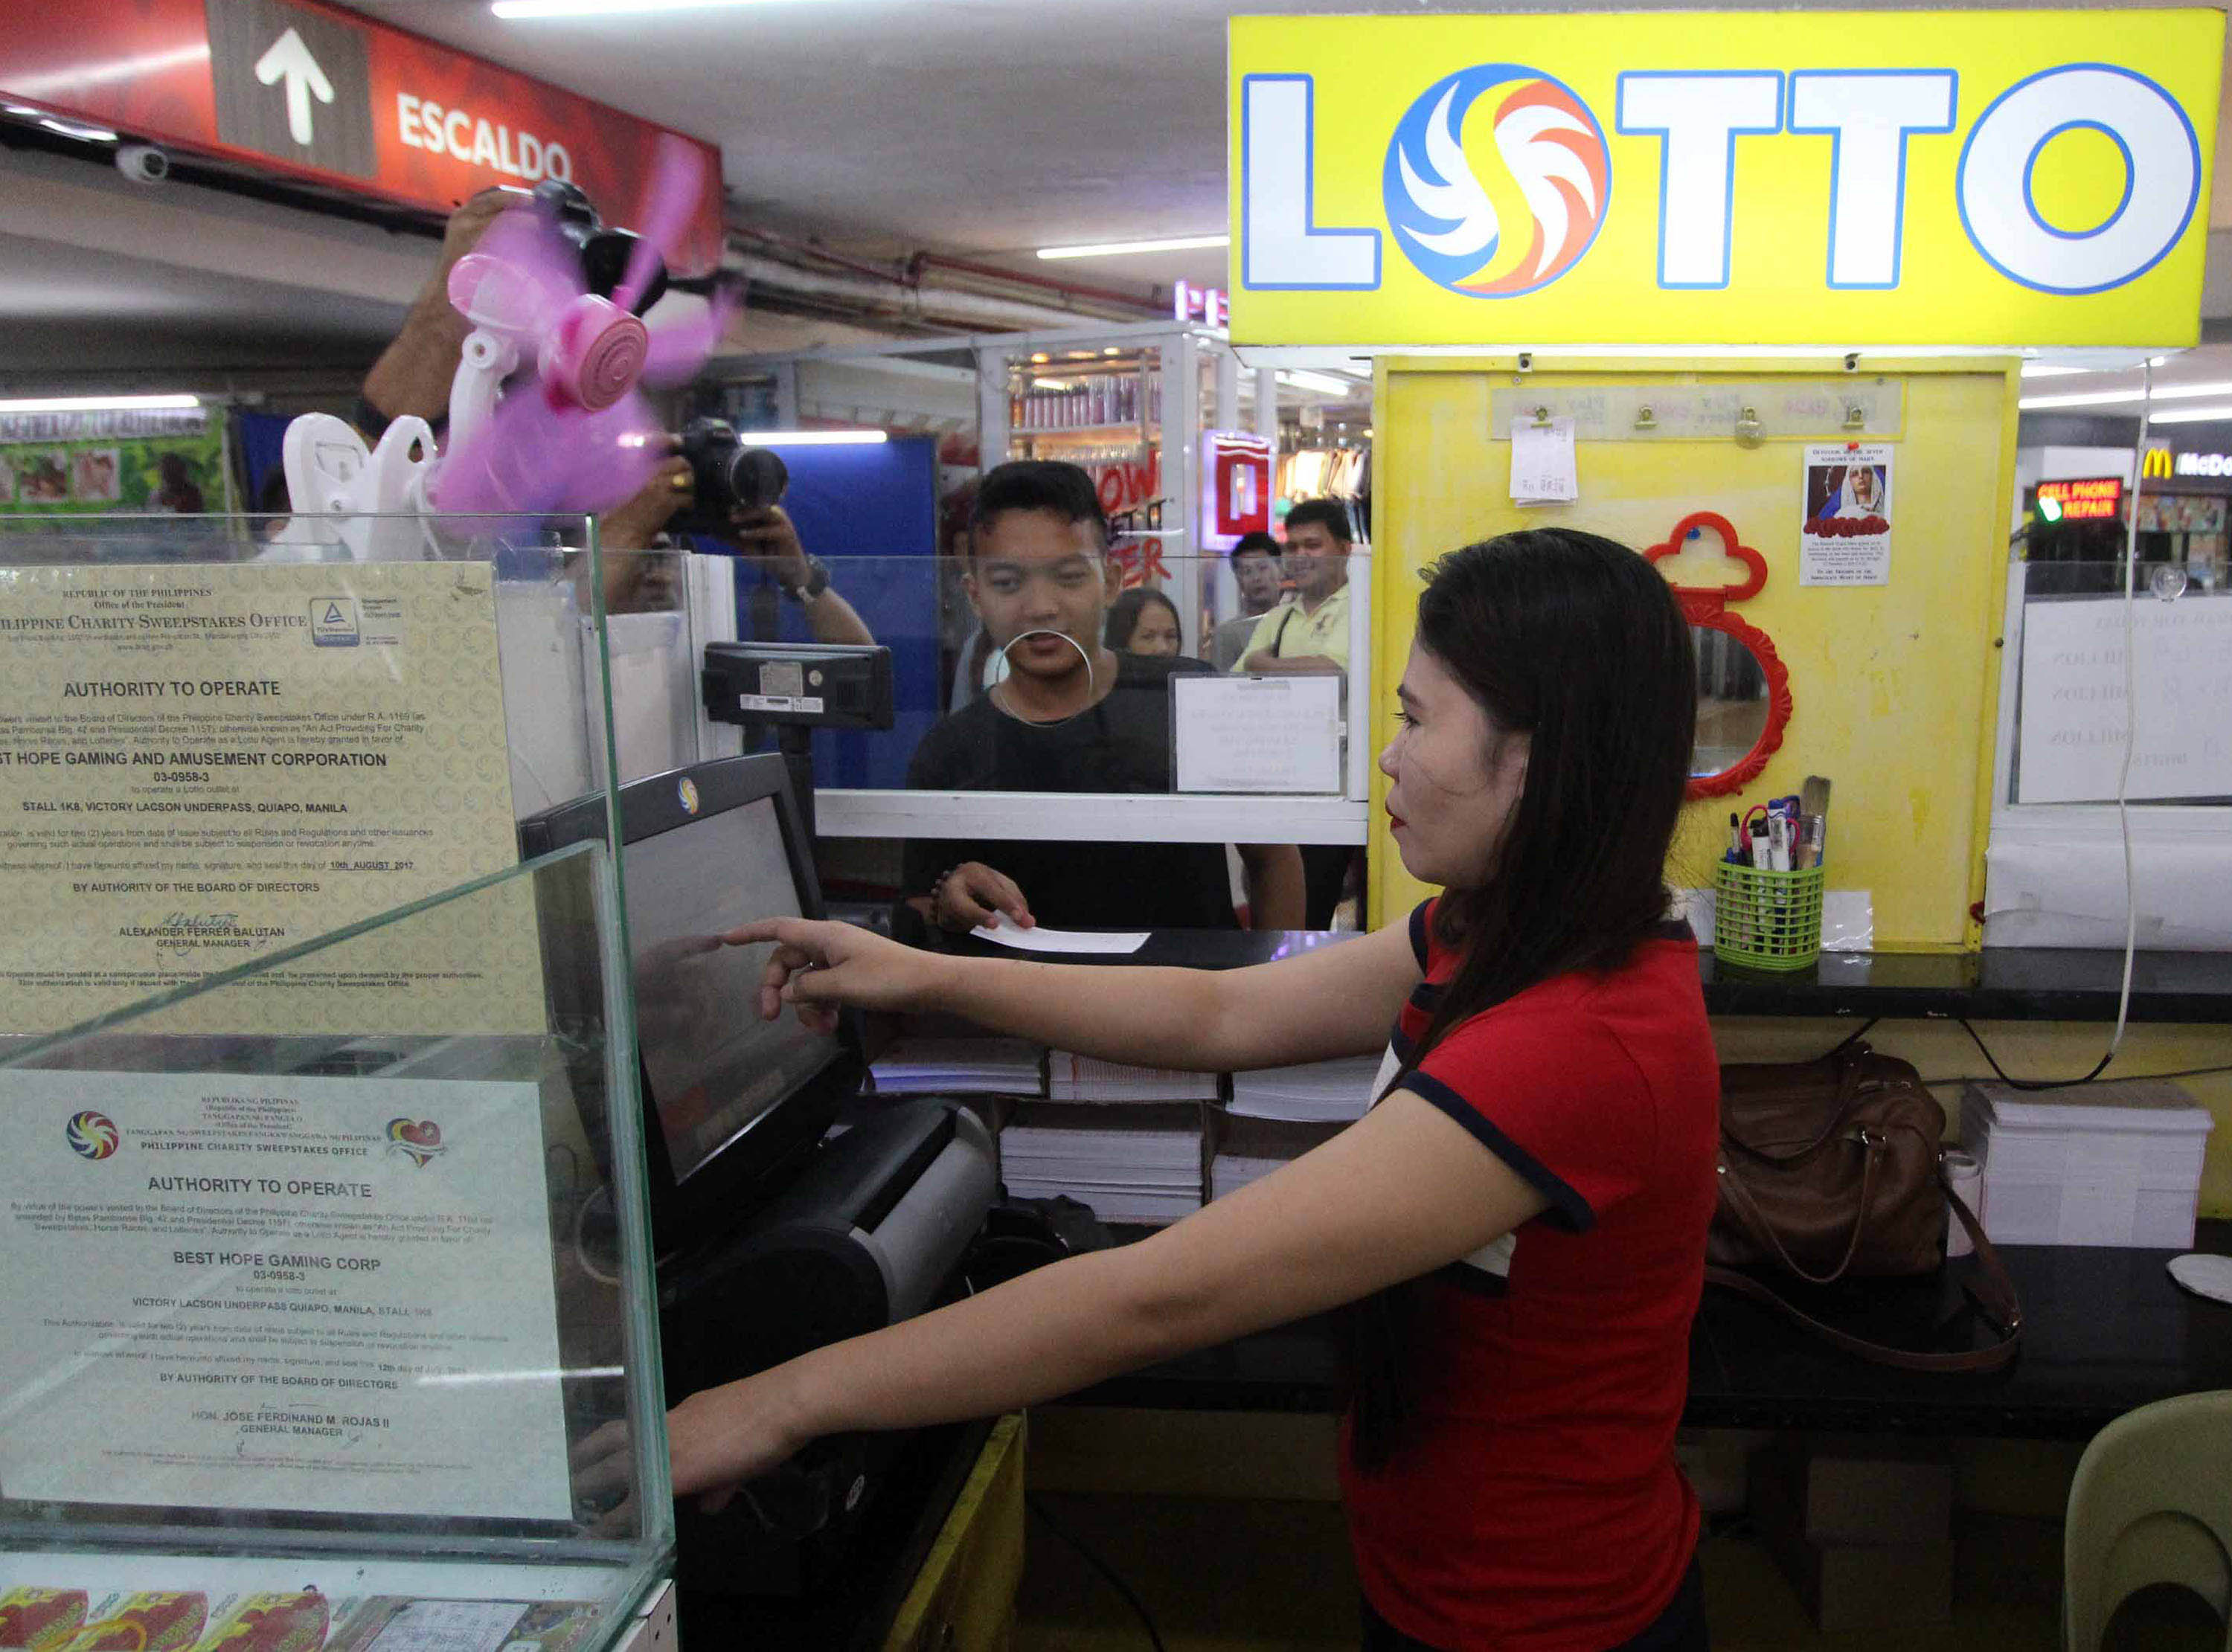 pcso lotto outlet franchise